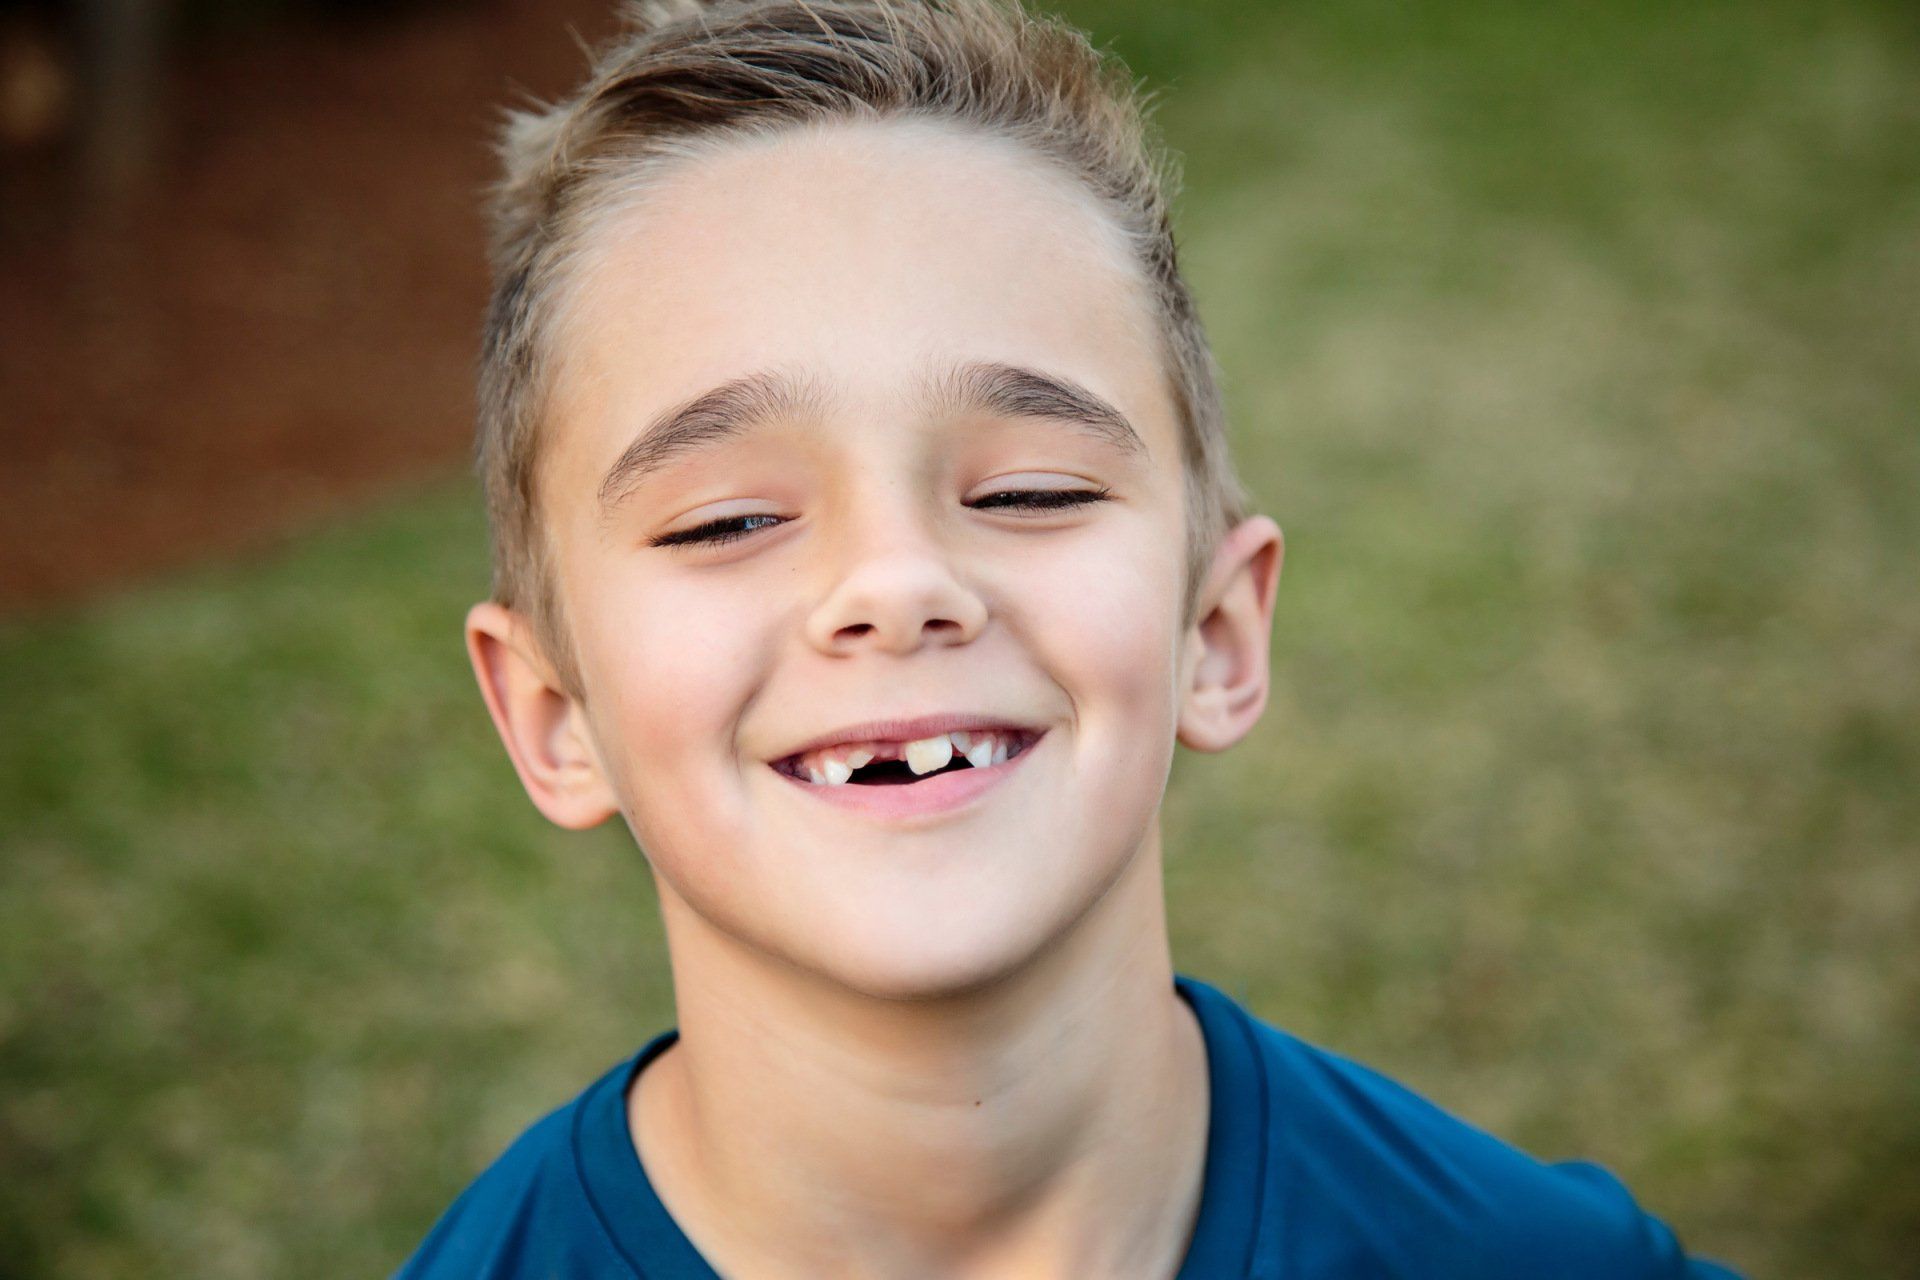 Child smiling with missing teeth